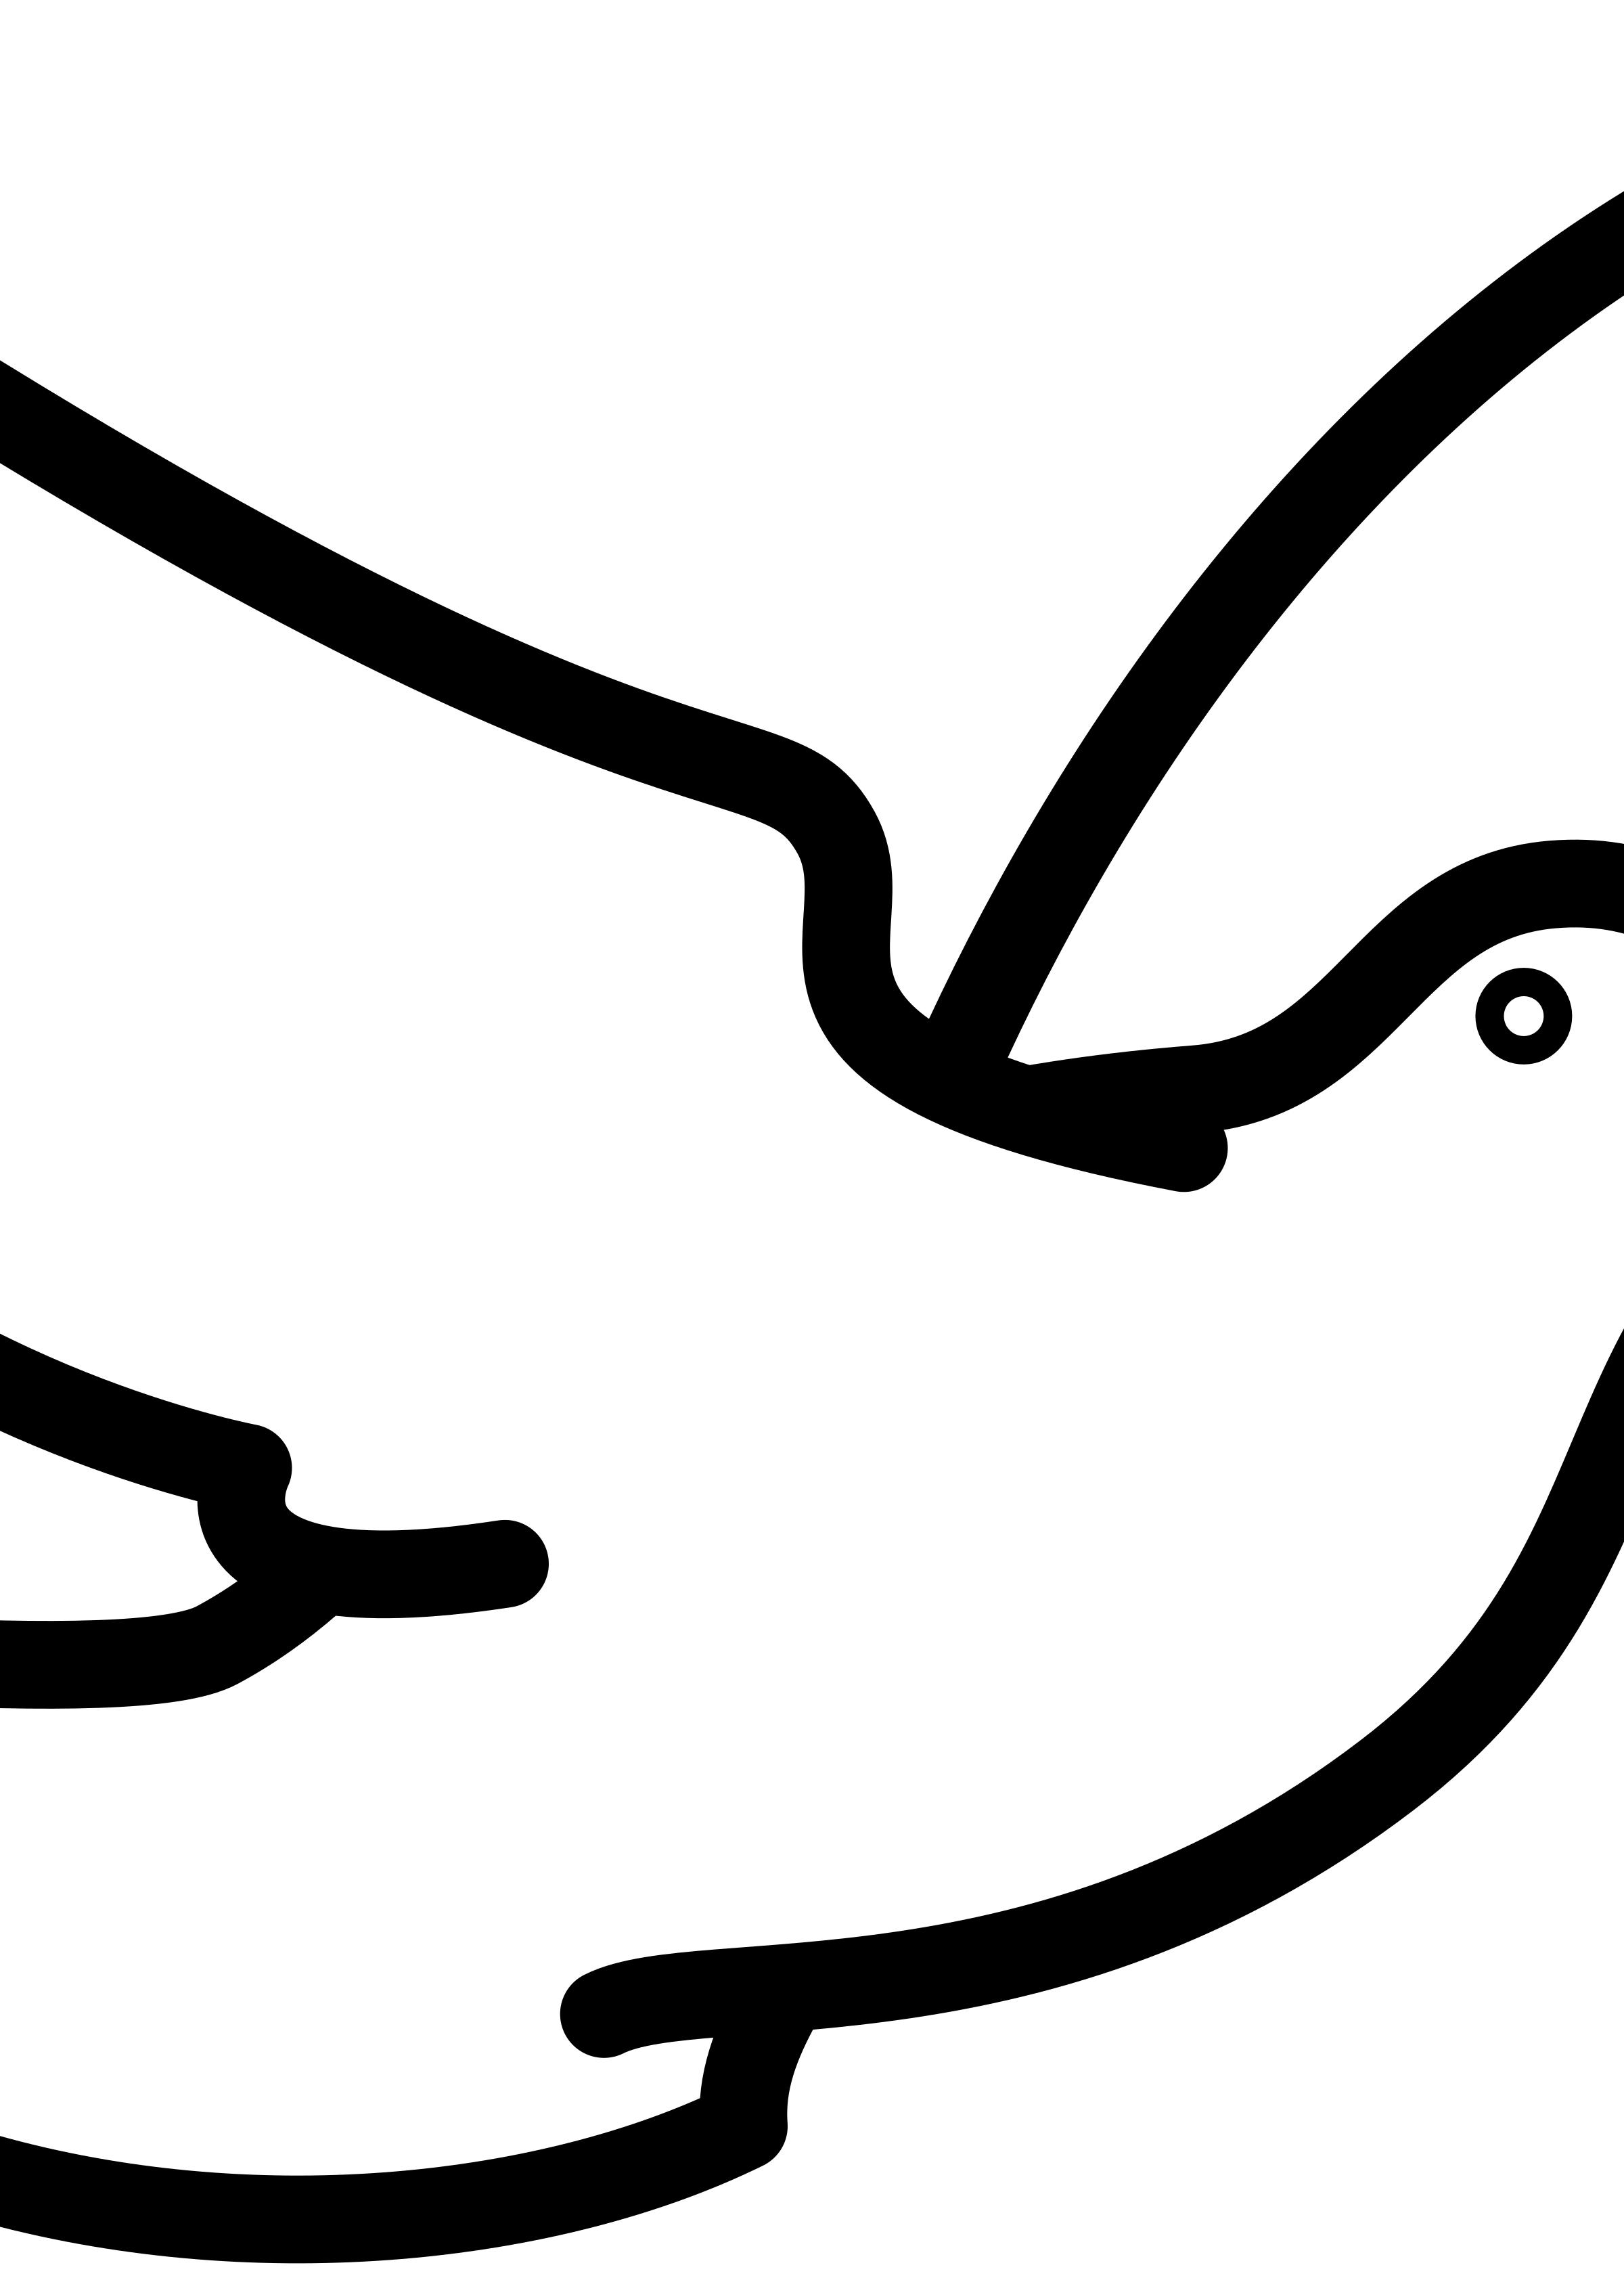 Dove flying png